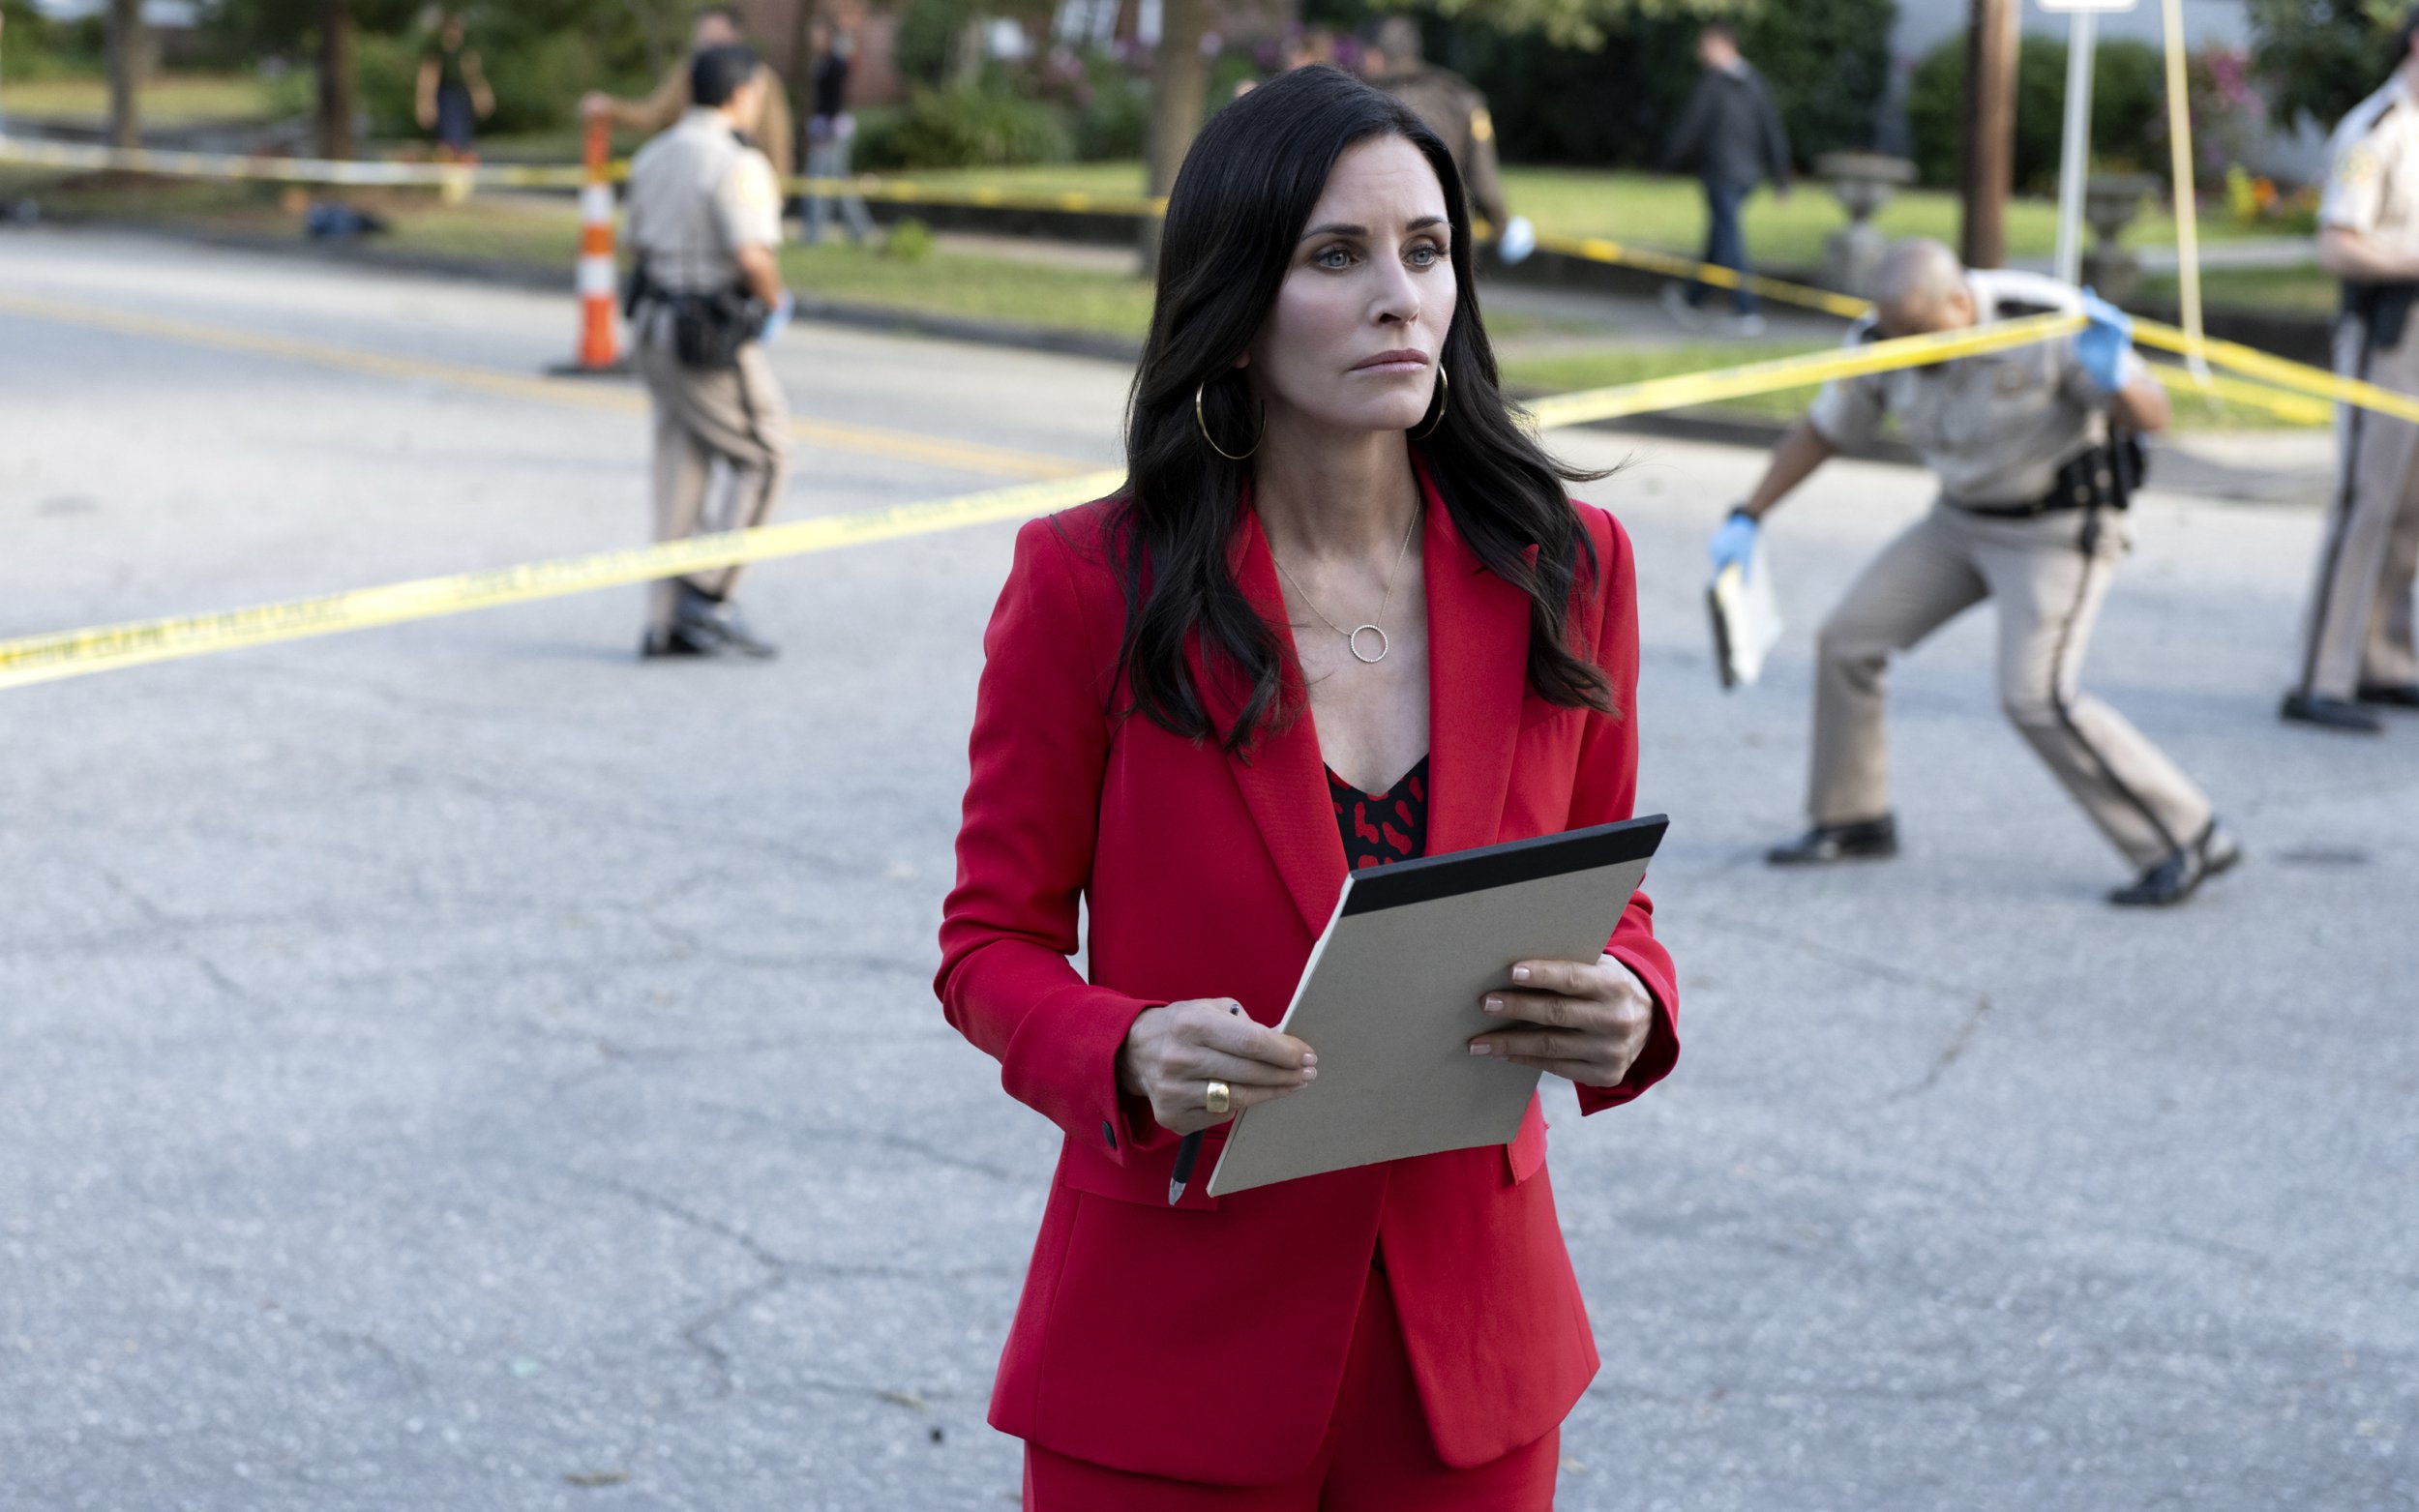 Courteney Cox teases Scream 6 return for Gale Weathers, promises ‘really good’ script